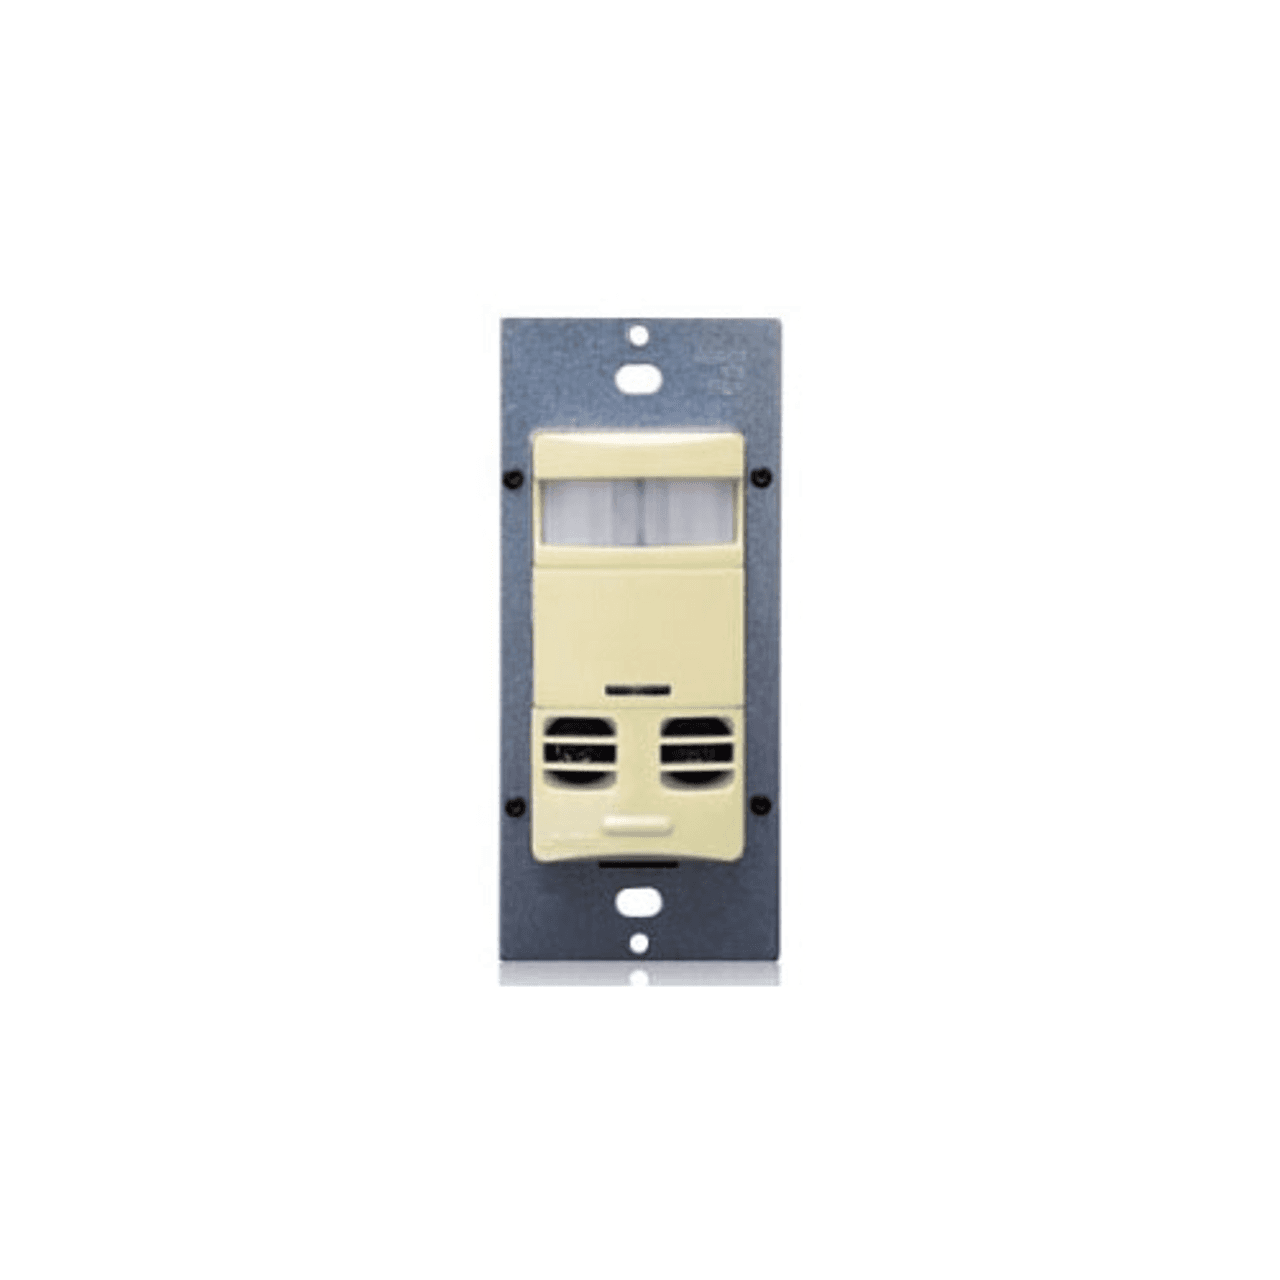 Leviton OSSMT-GDI 1.75" x 1.85" x 4.06", 120/208/220/230/240/277 VAC 50/60 Hz, 1200/1500/2700 VA Fluorescent, 800 W Incandescent/Tungsten, 1/4 HP Motor, Ivory, 2400 Sq Ft, 180D View, 30 Sec to 30 Min Time Delay, Wall Mount, Passive Infrared/Ultrasonic, Multi-Technolog